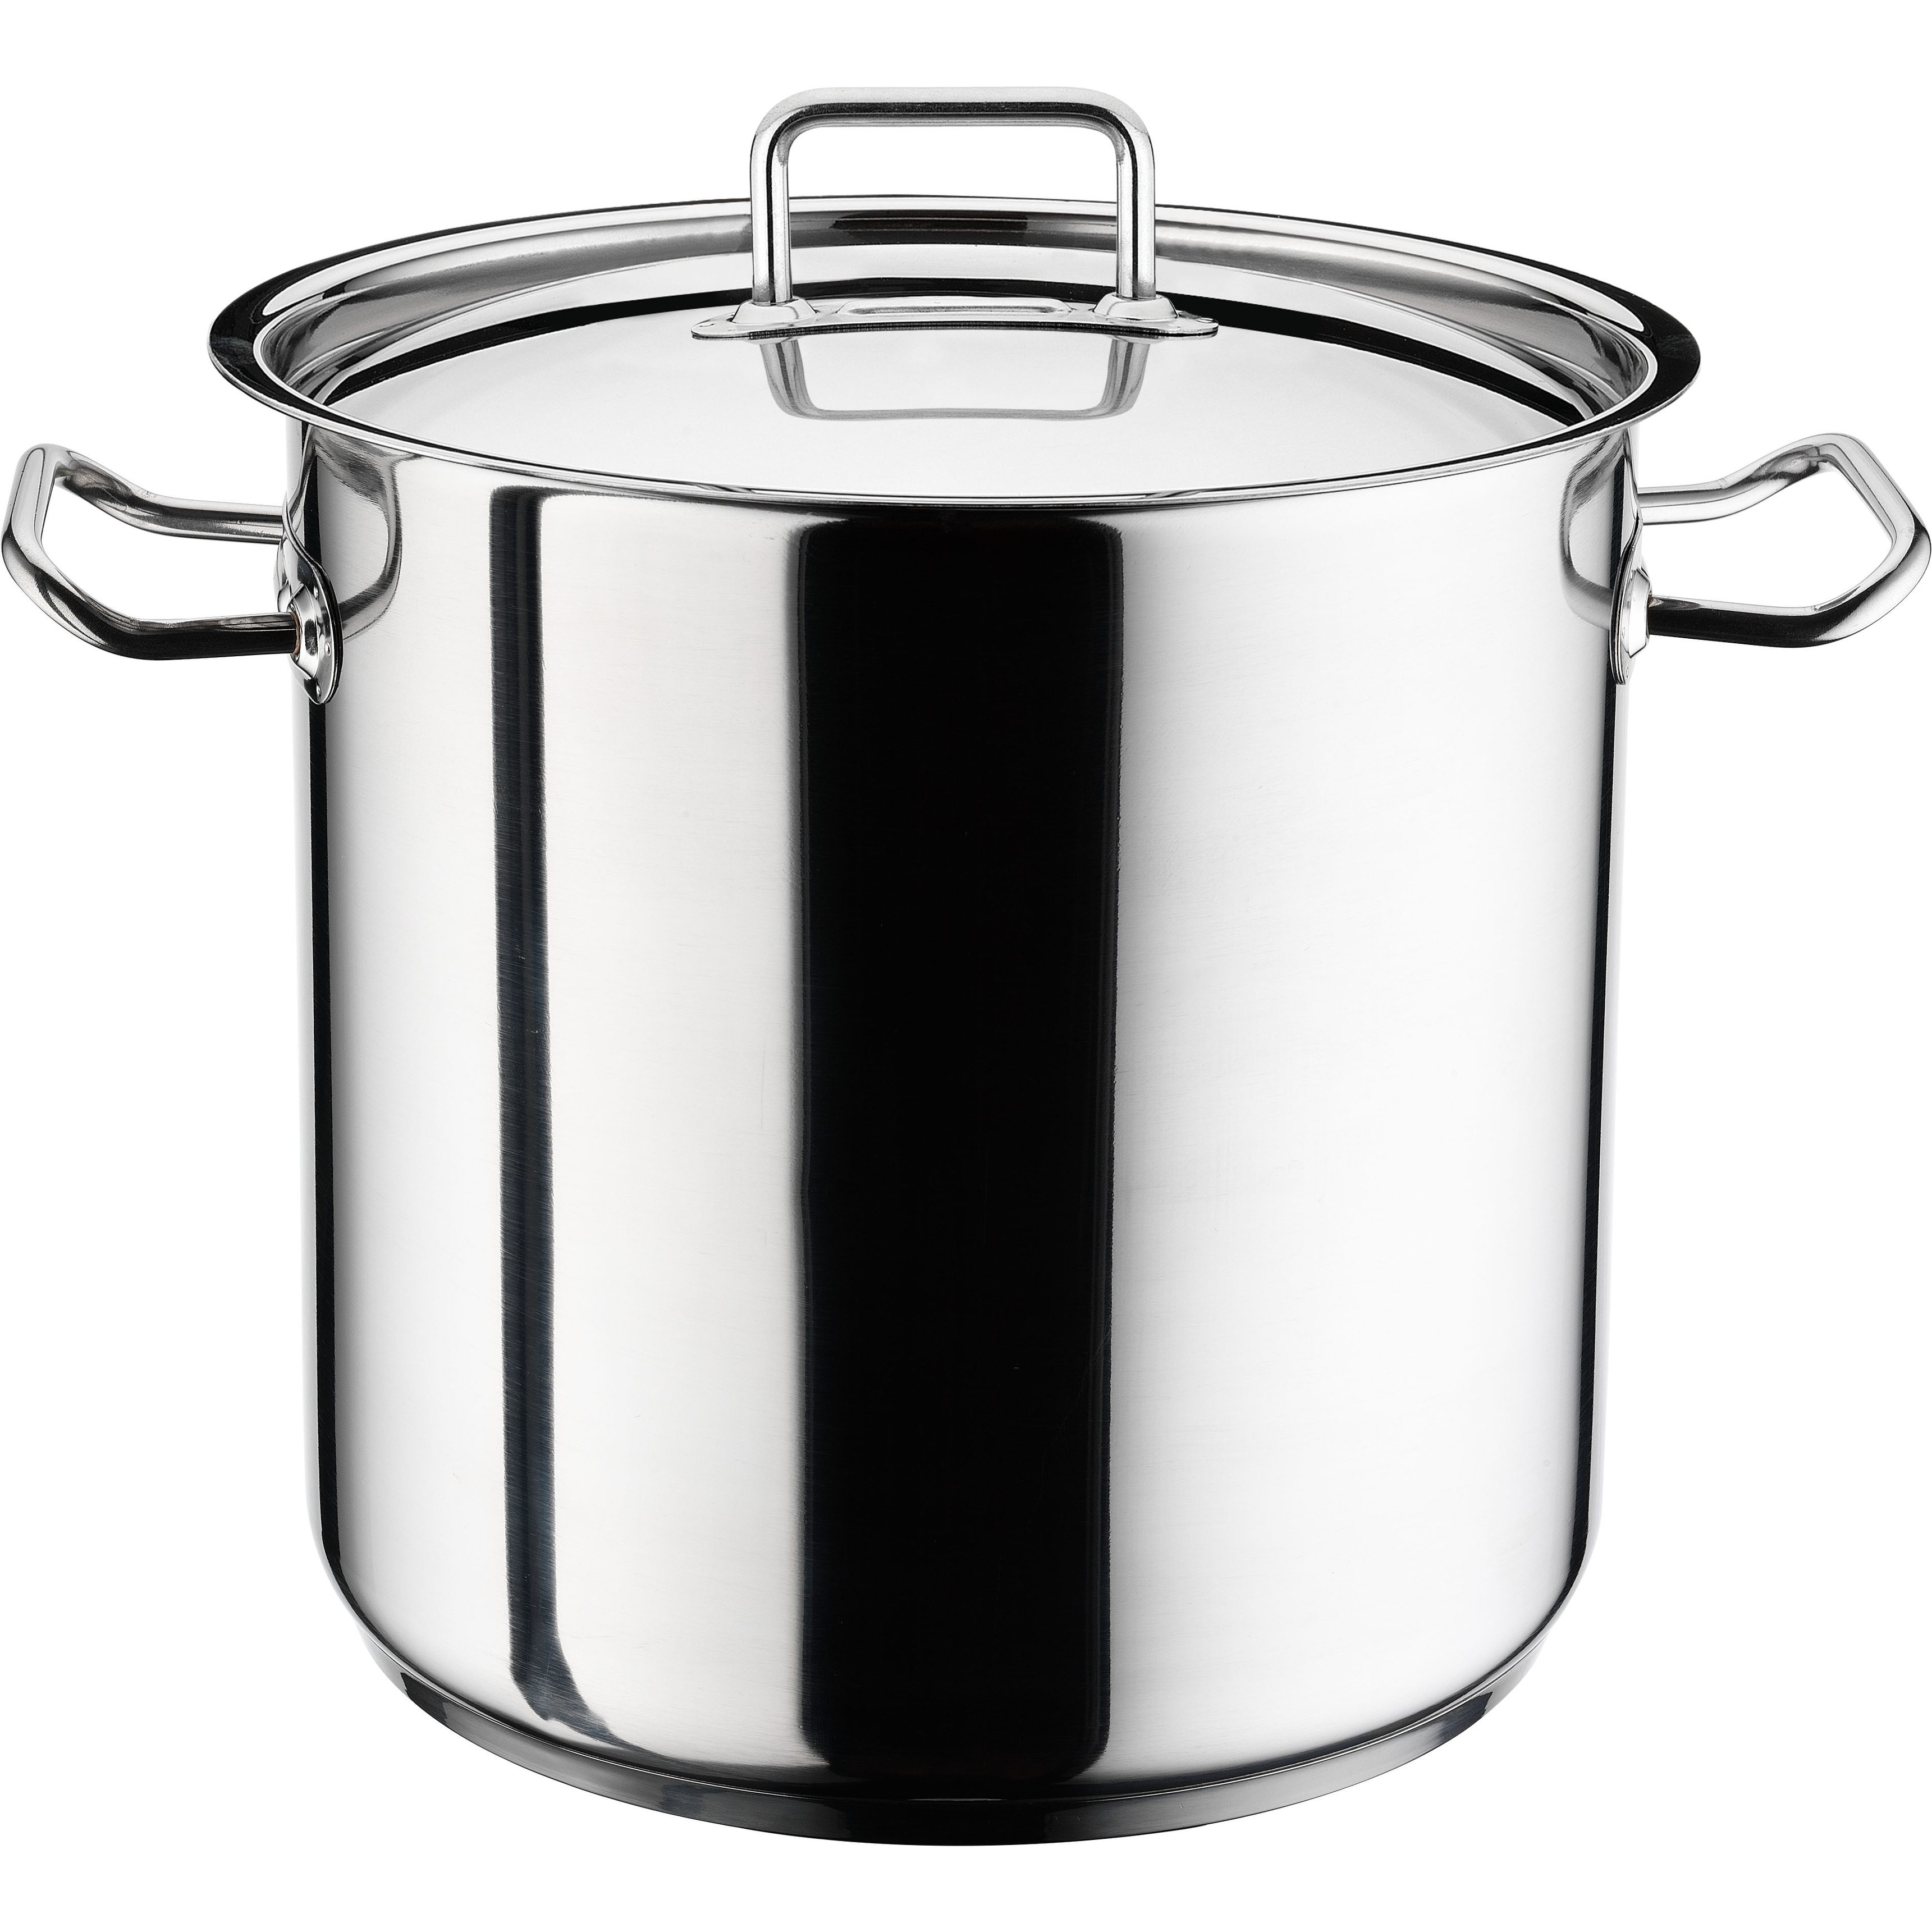 https://ak1.ostkcdn.com/images/products/is/images/direct/45bb30f1cc1e368f030f34e5f712794f326fae86/Chef%27s-Induction-Stockpot-with-Lid%2C-Multi-Purpose-Cookware%2C-H28.jpg